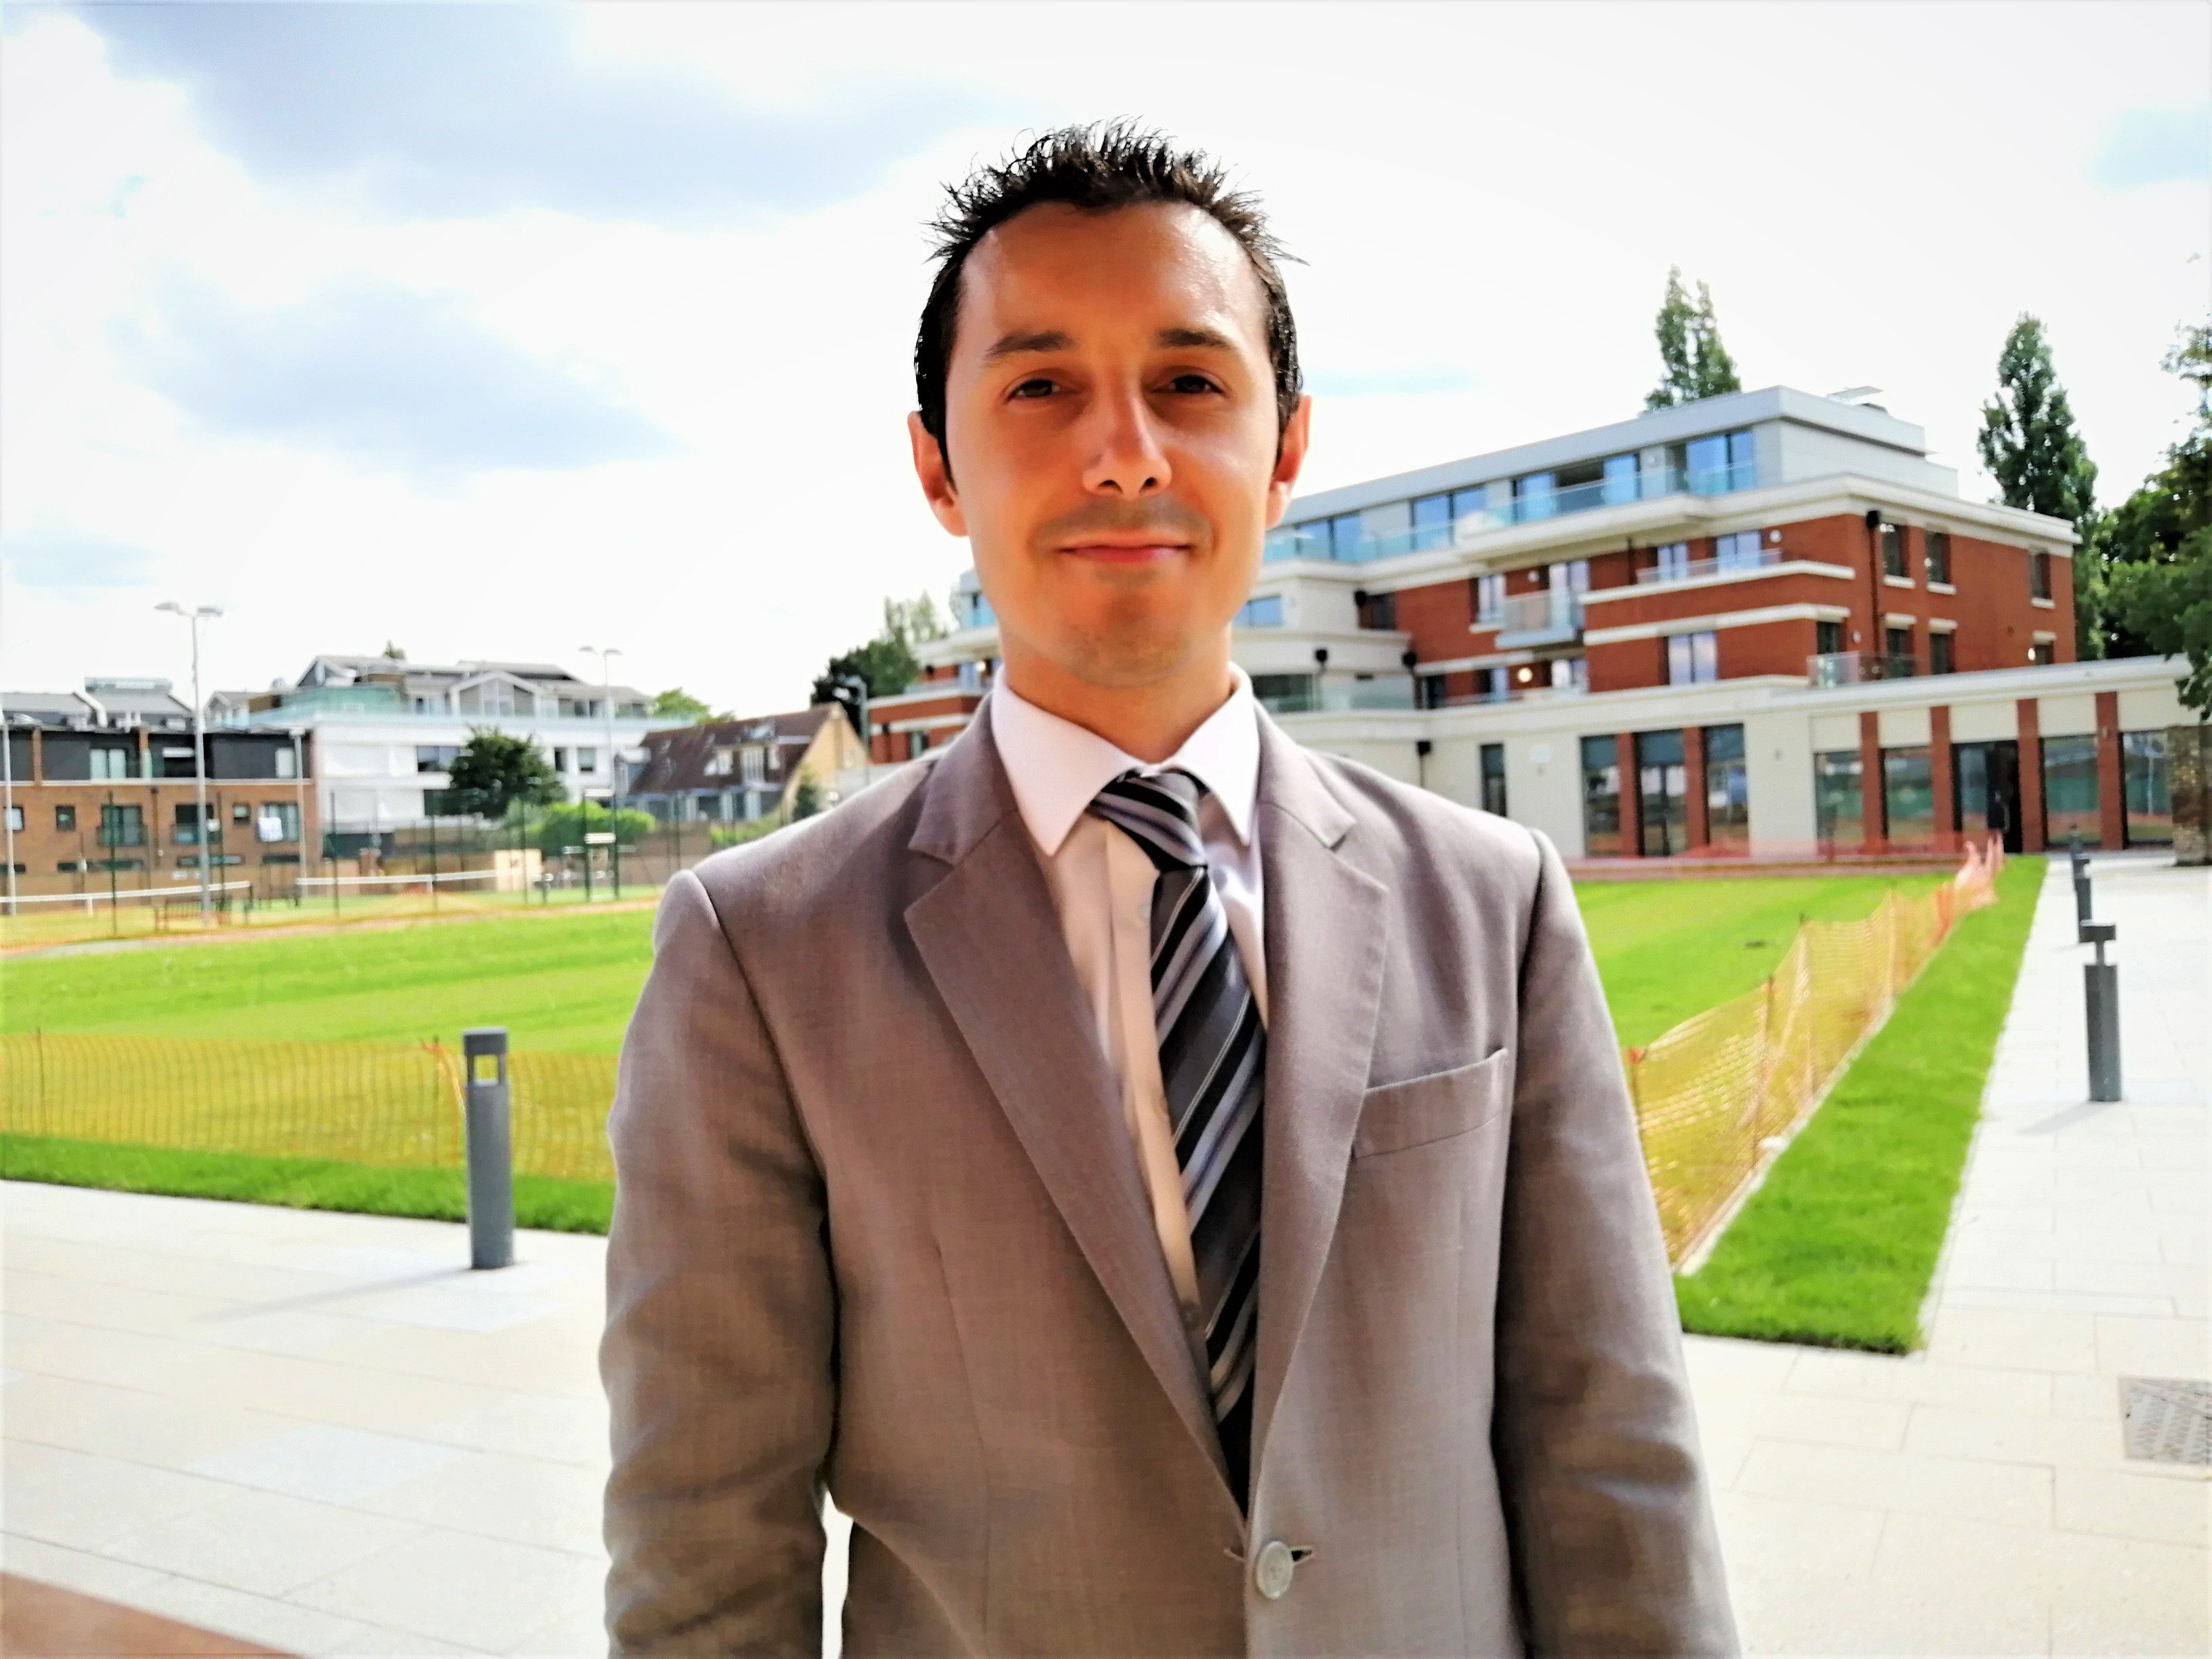 Pictured - Ricardo Monteiro, General Manager at Parsons Green Sports & Social Club